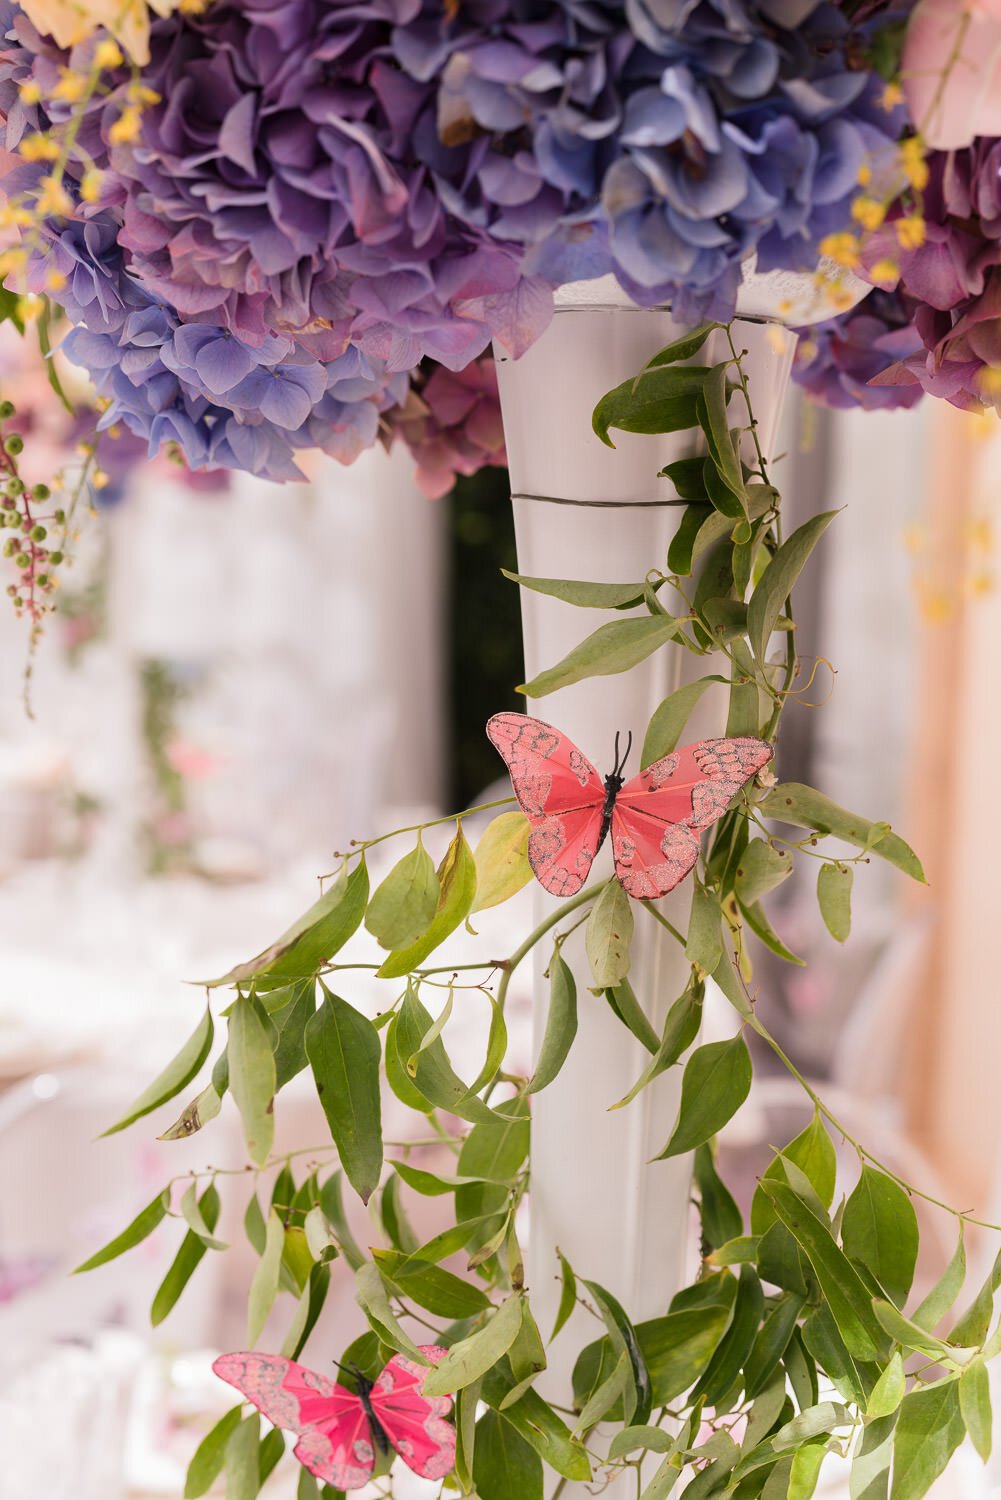 Miss Dior Pop-up - We Love Art  Wedding design decoration, Flower party  themes, Butterfly bridal shower